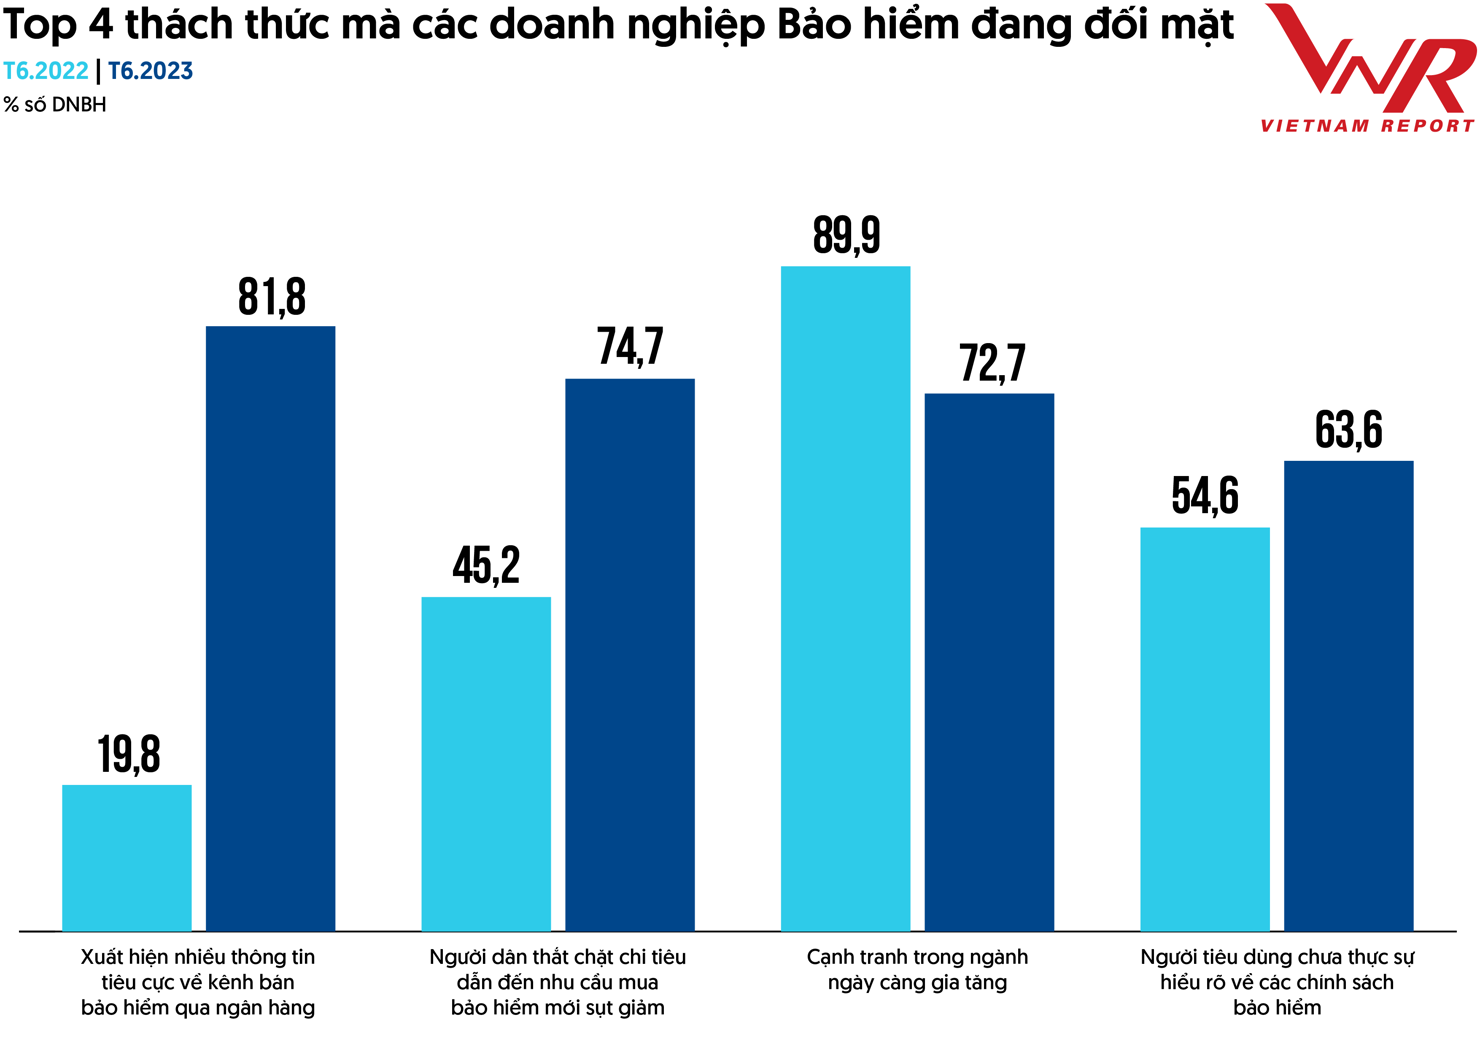 Nguồn: Vietnam Report, Khảo s&aacute;t DNBH trong th&aacute;ng 6/2022 v&agrave;&nbsp;th&aacute;ng 6/2023